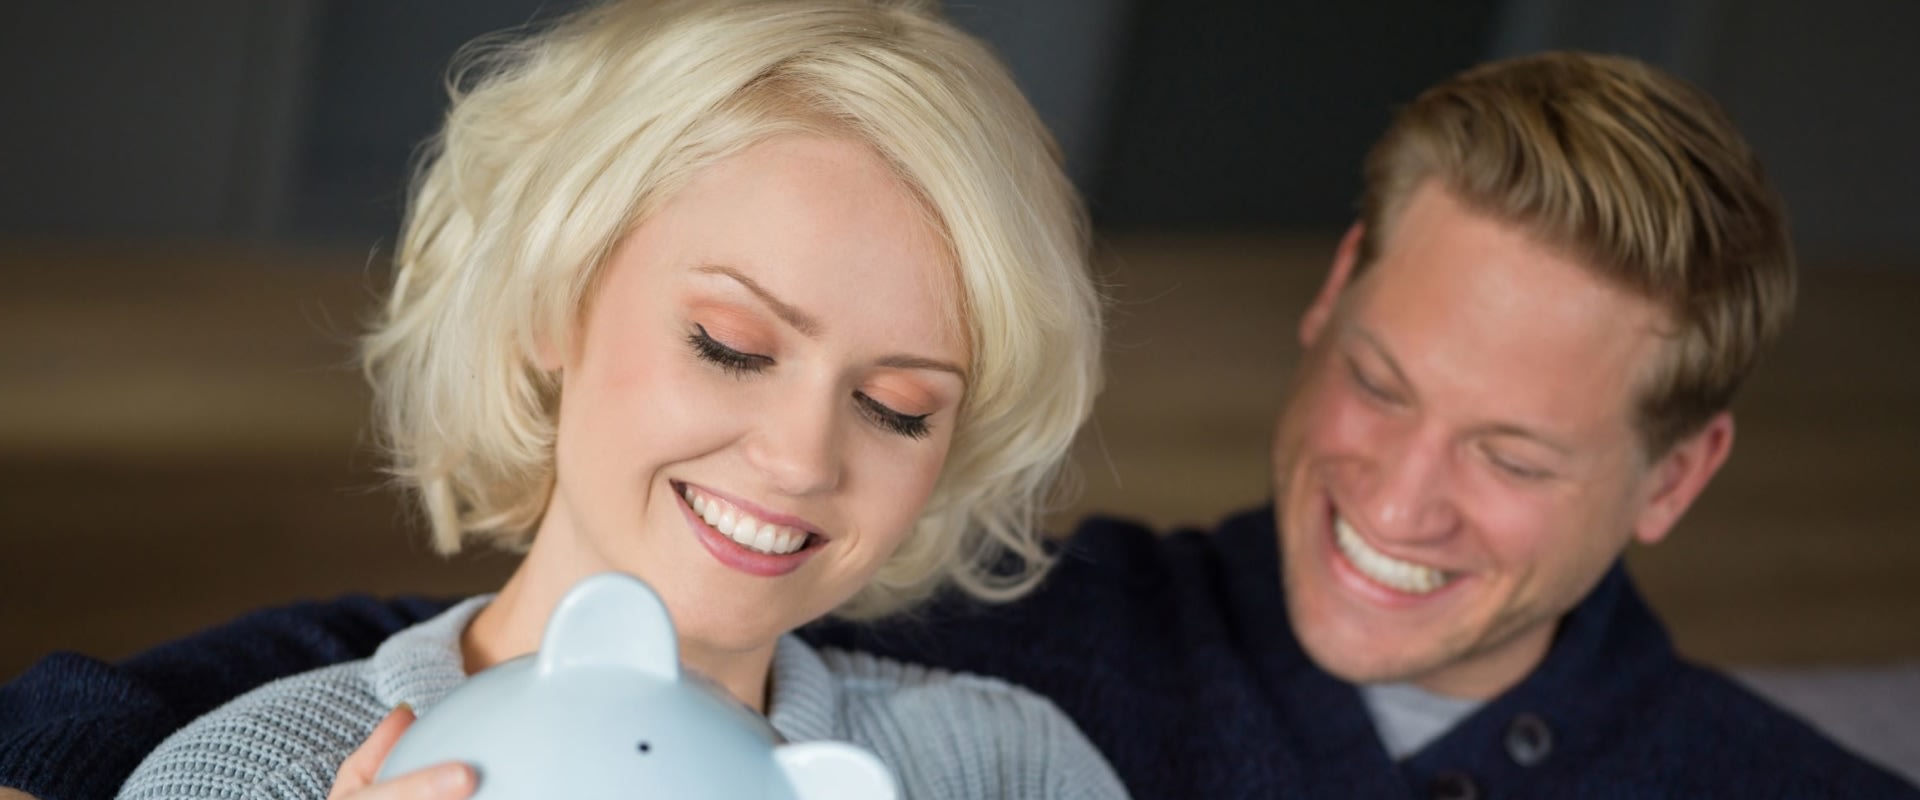 Managing Money as a Couple: How to Make Financial Decisions Together